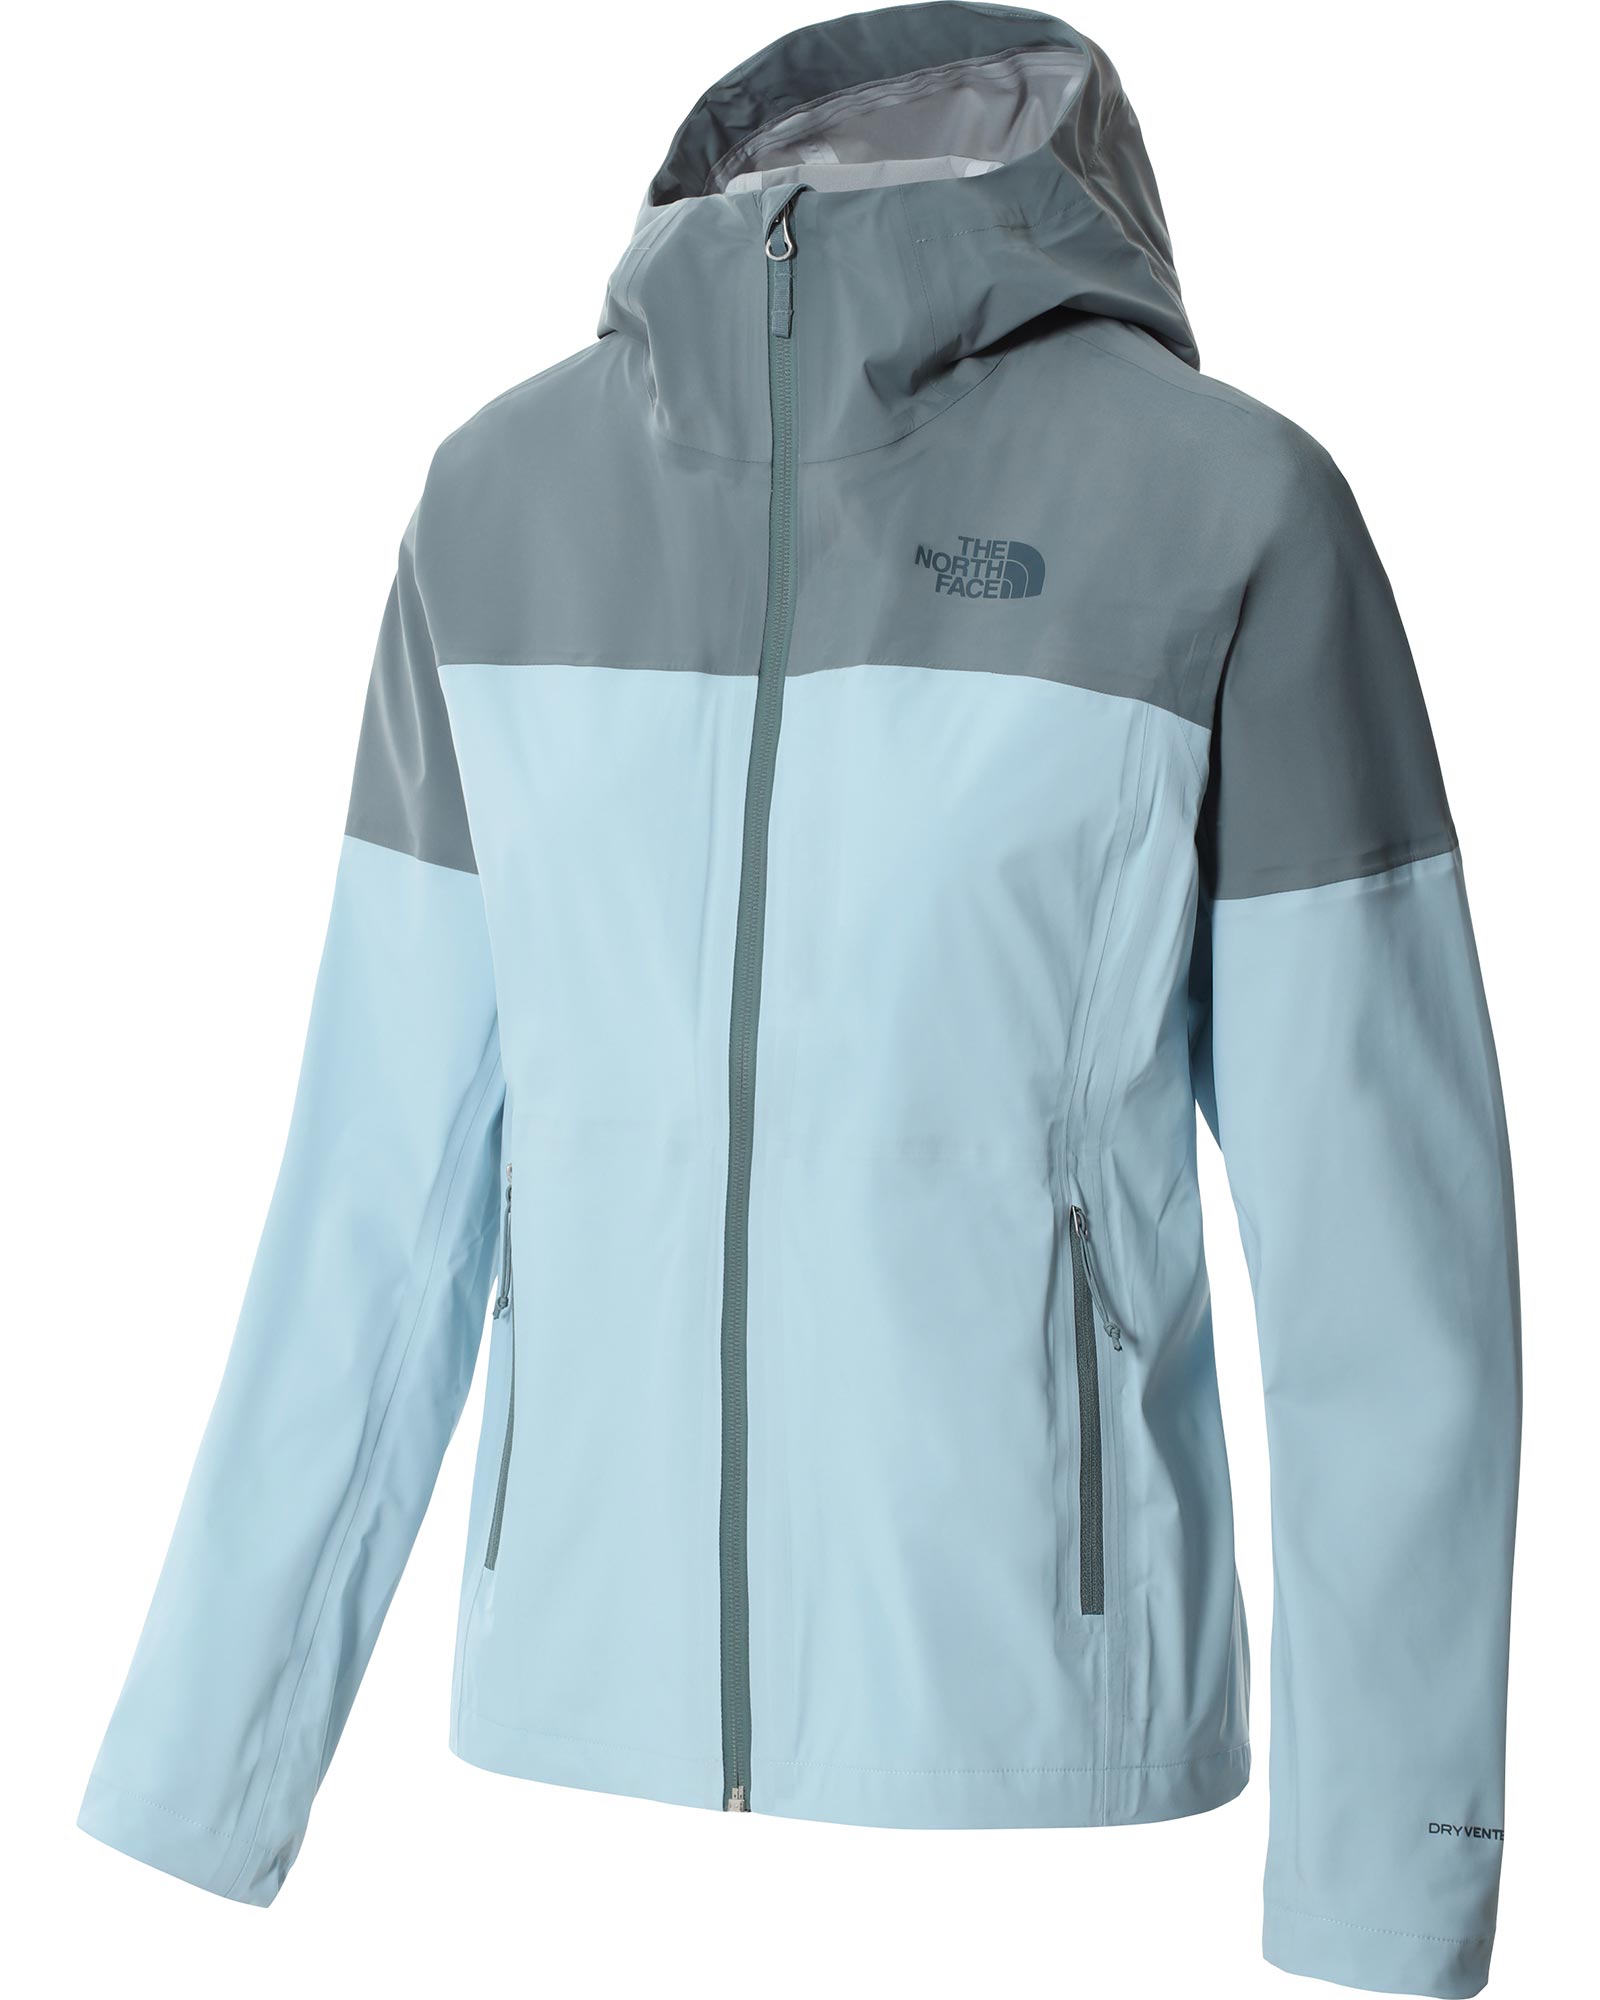 The North Face West Basin DryVent Women’s Jacket - Beta Blue S